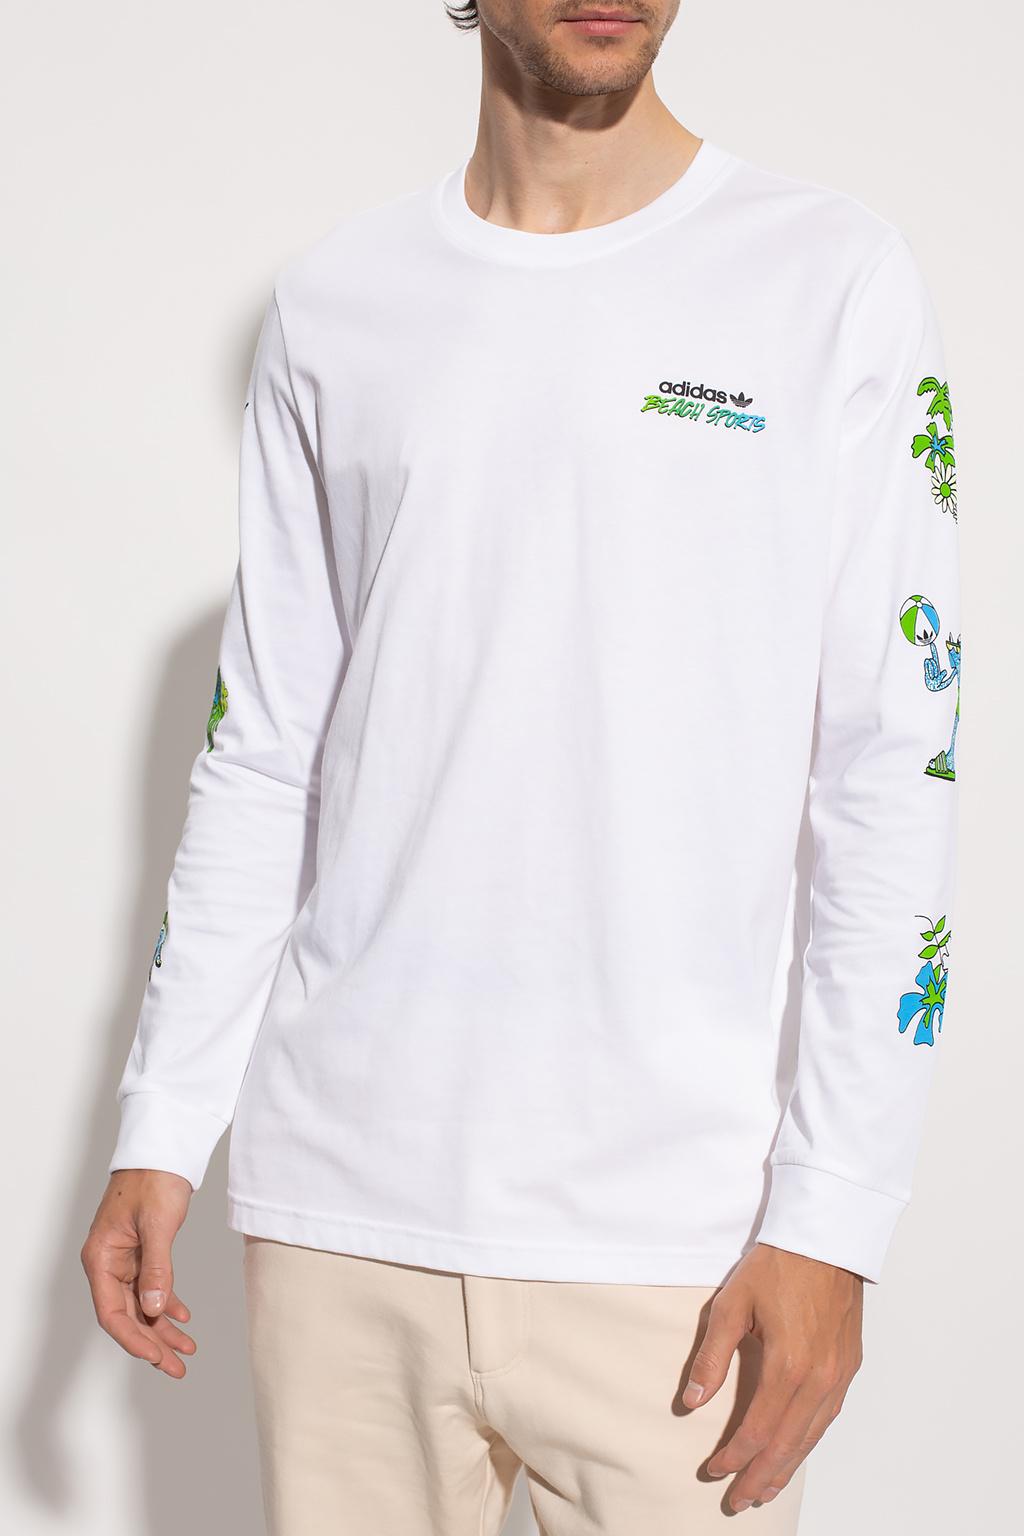 adidas Originals T-shirt With Long Sleeves in White for Men | Lyst